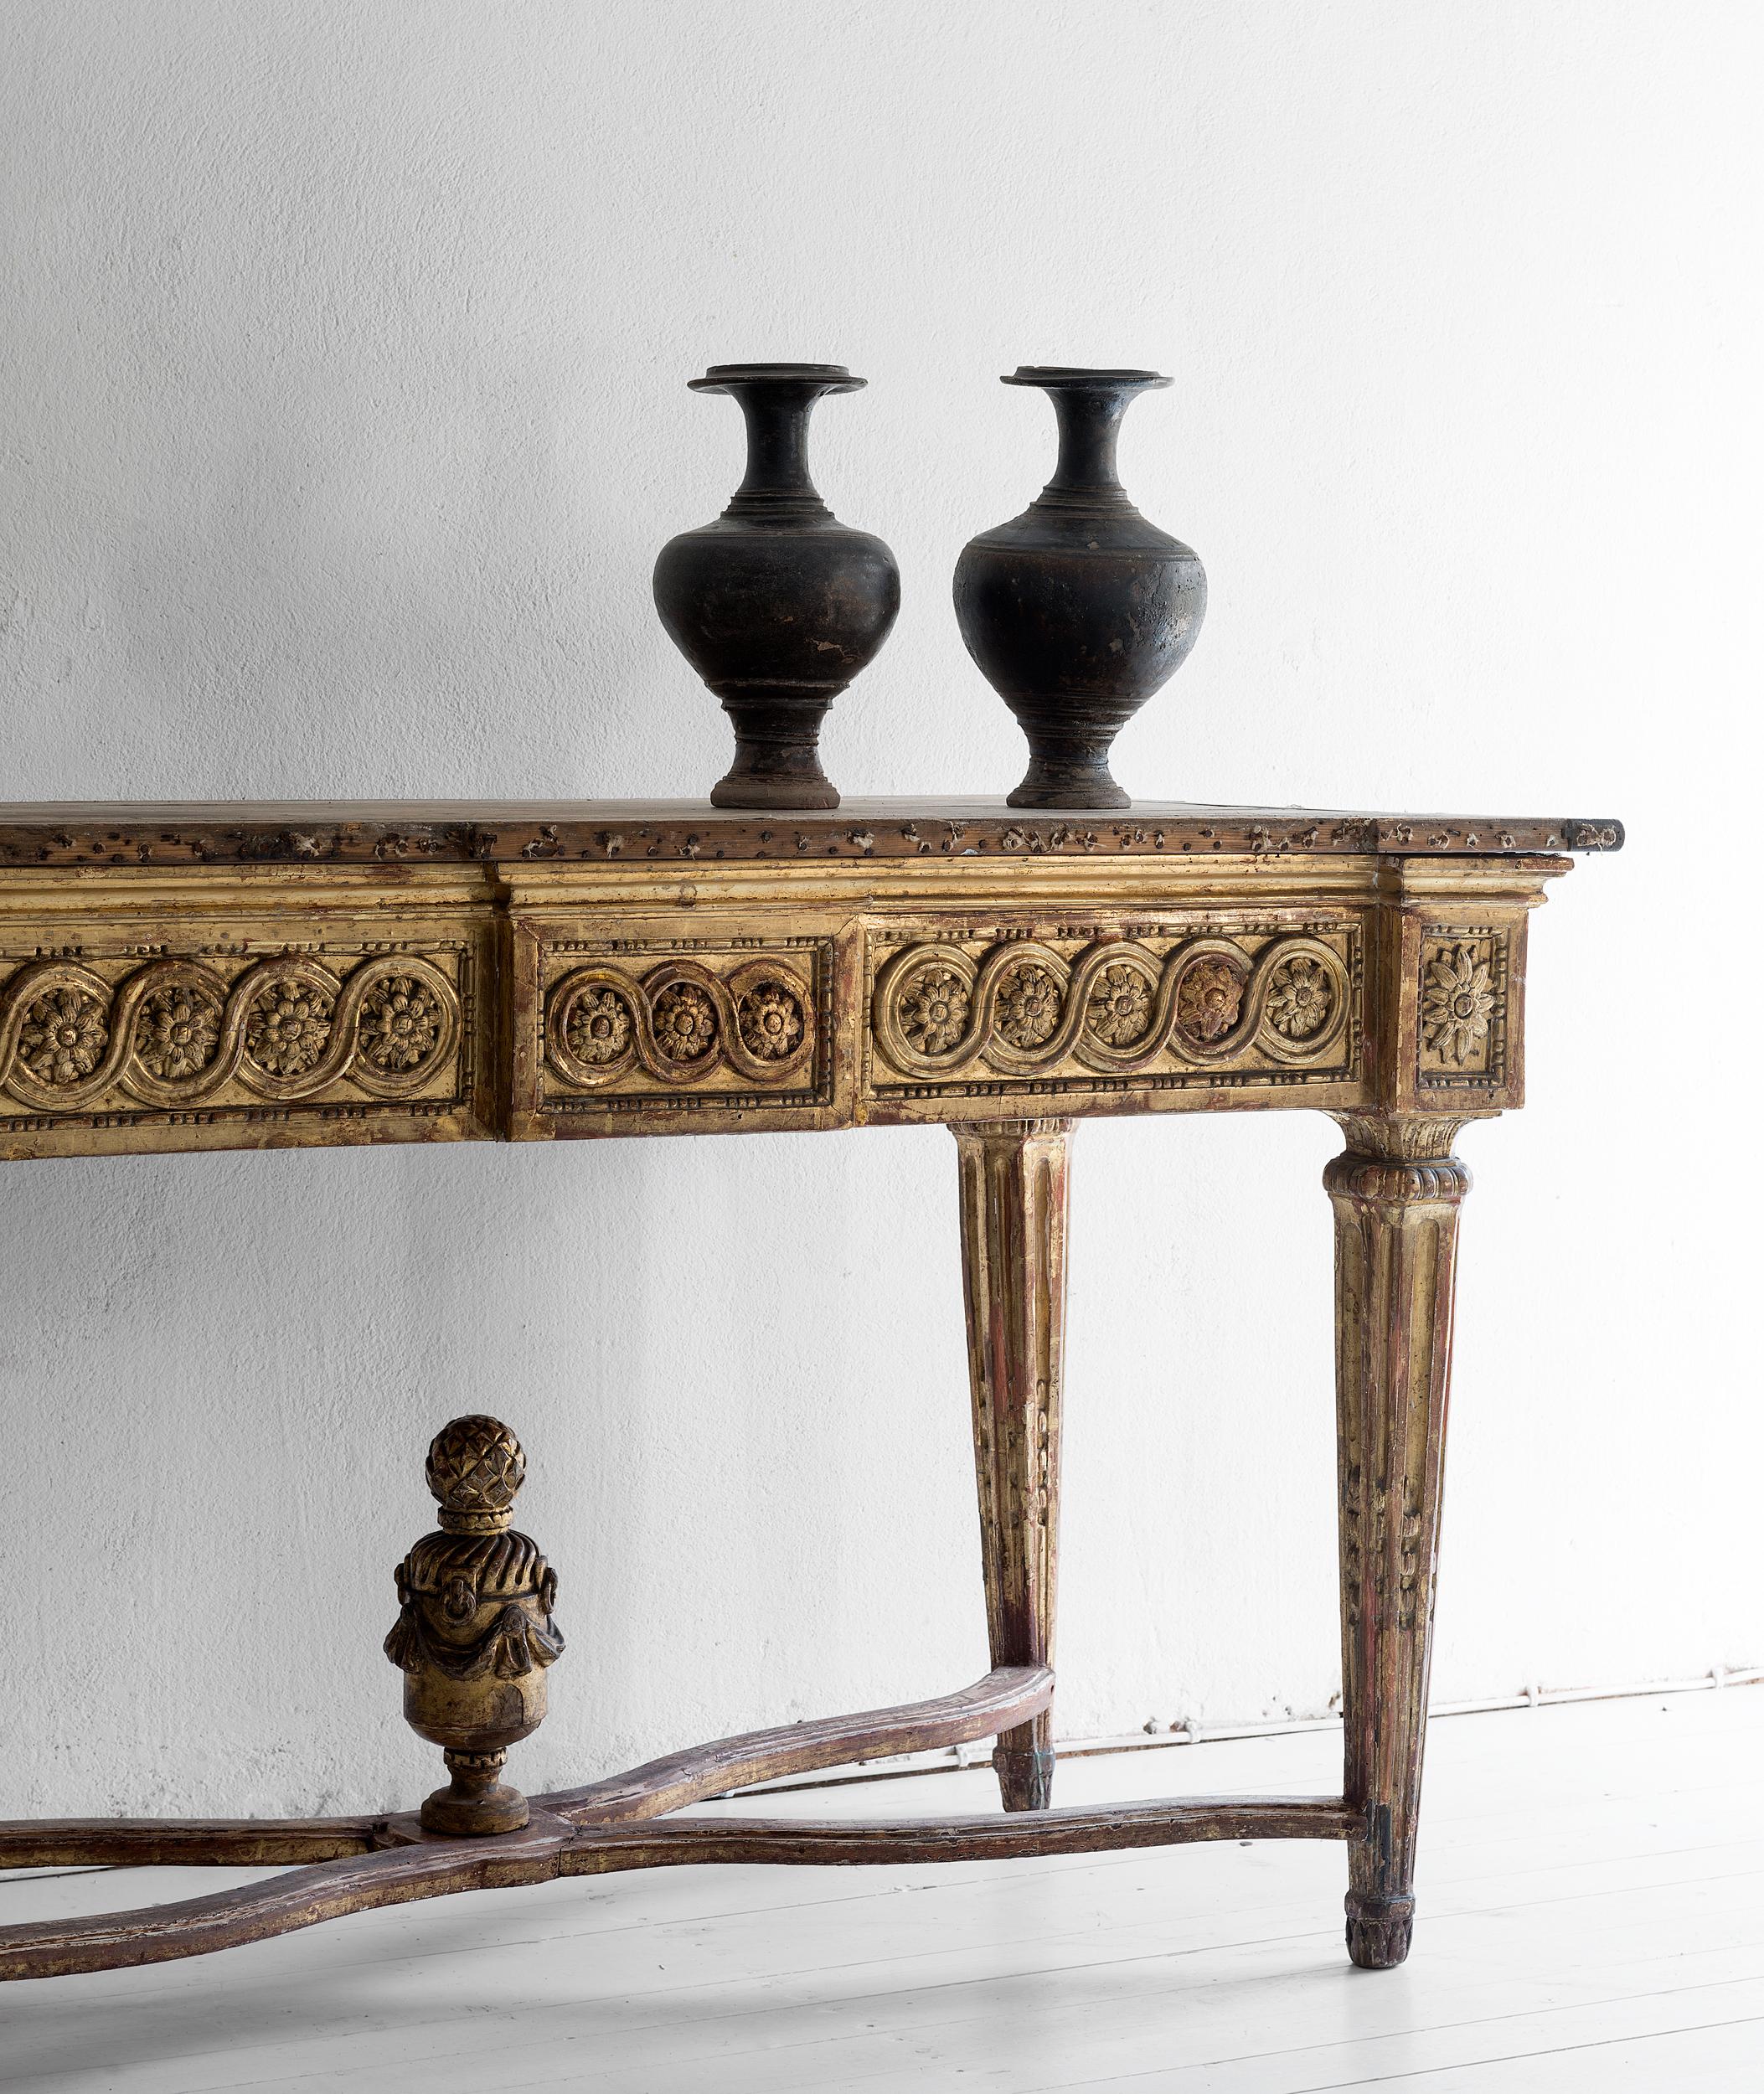 Outstanding Northern neoclassical salon table of imposing proportions, circa 1790.
Richly carved and original gilt.

Measures: 150 cm width
78 cm depth
85 cm height

Provenance:
Quite possibly executed for the Court in circa 1790
Bought in